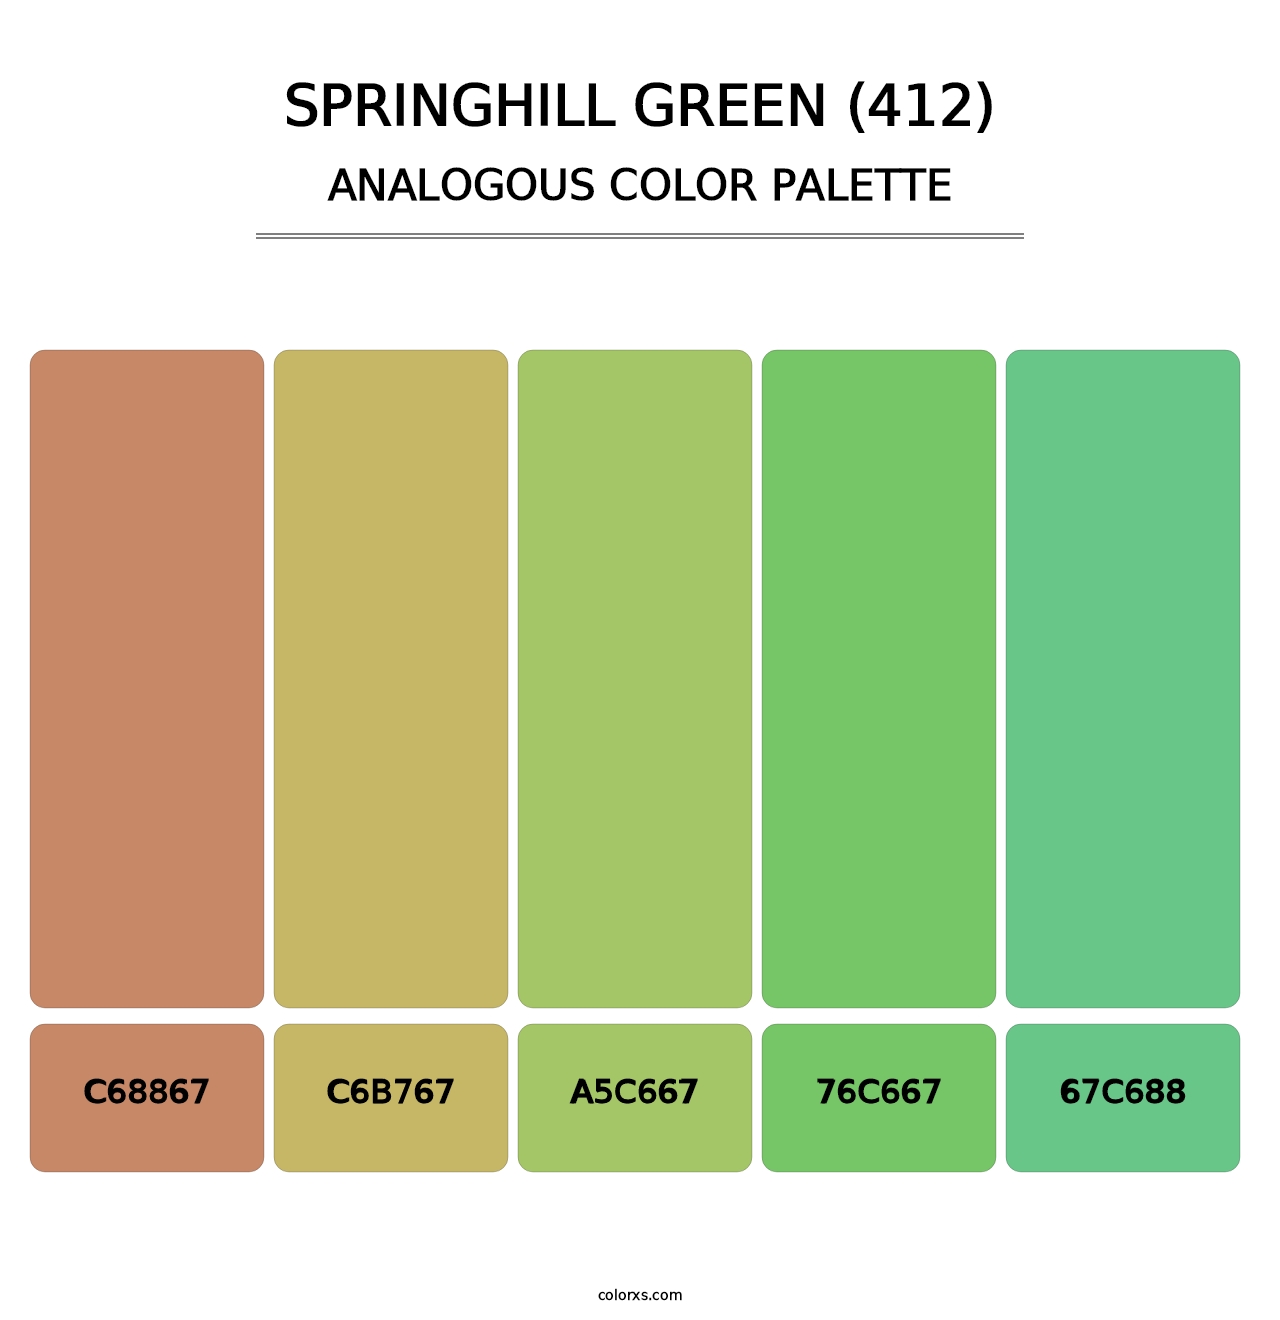 Springhill Green (412) - Analogous Color Palette